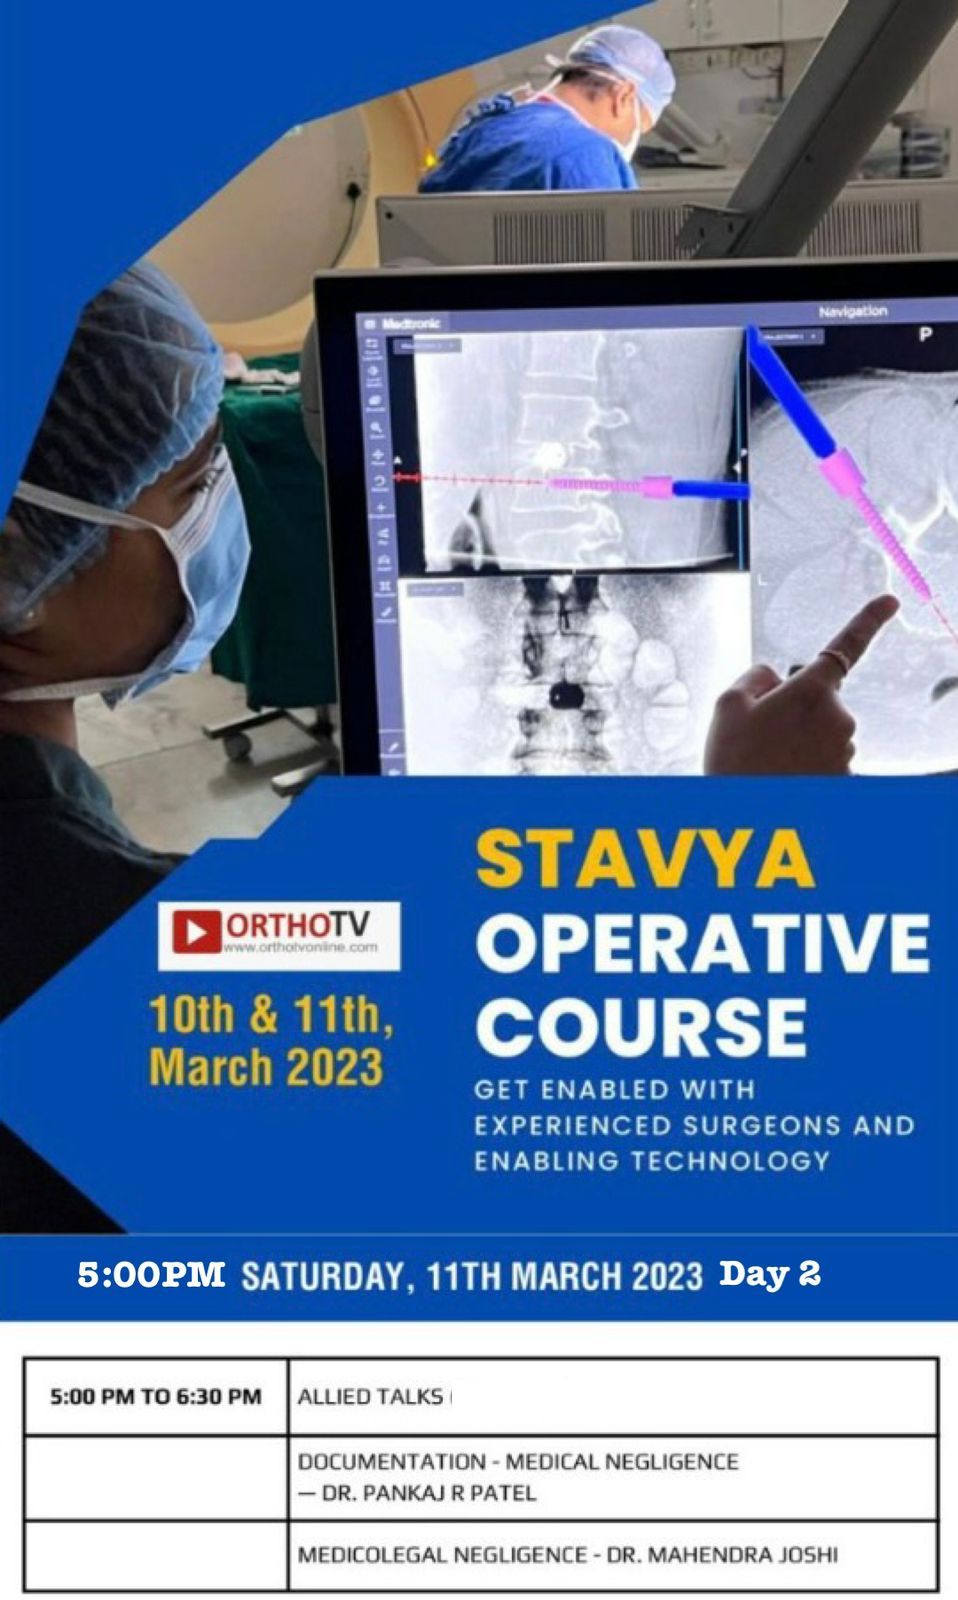 STAVYA OPERATIVE COURSE - GET ENABLED WITH EXPERIENCED SURGEONS AND ENABLING TECHNOLOGY